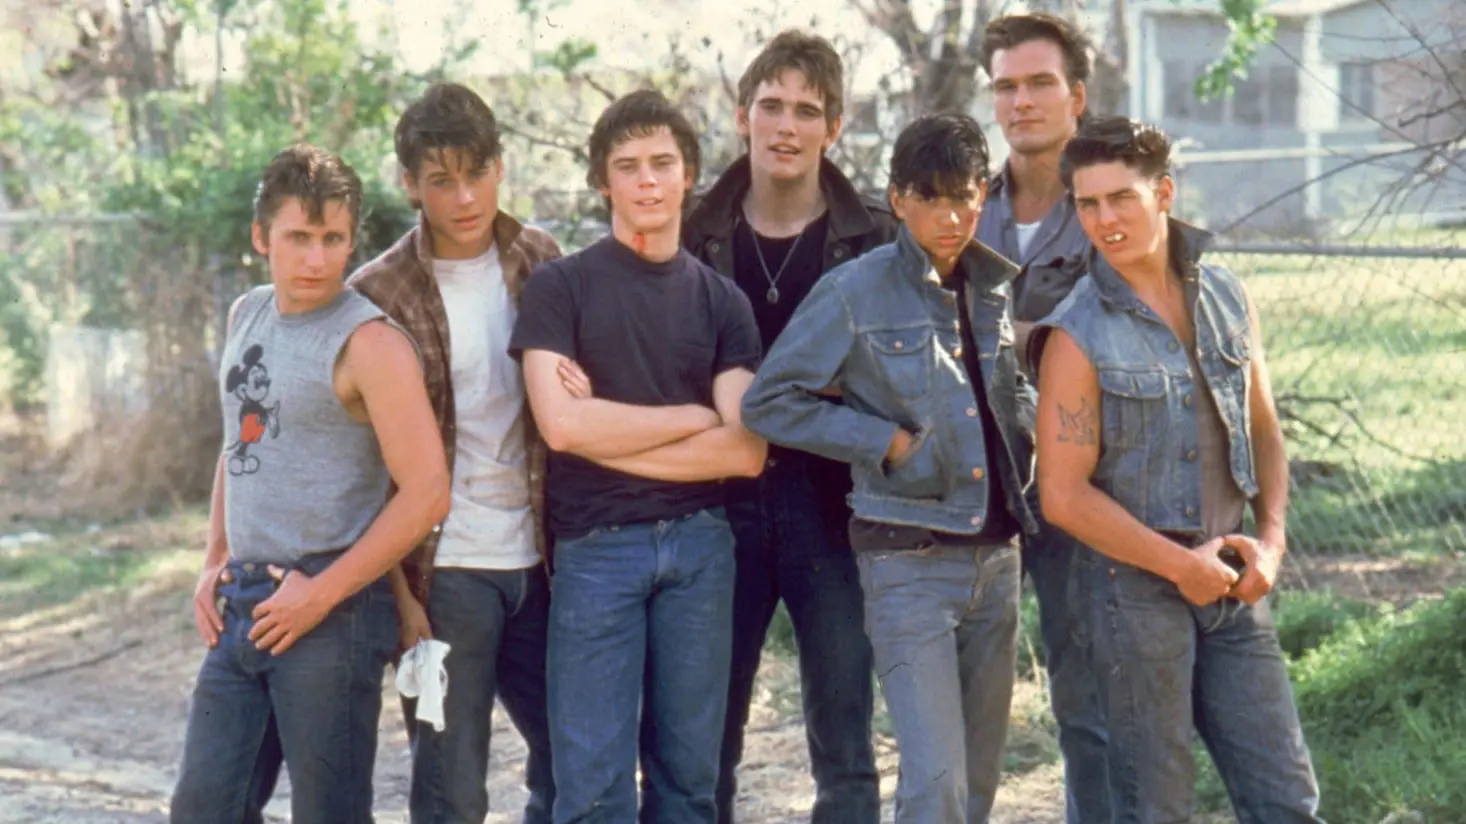 The cast playing The Greasers in THE OUTSIDERS: Emilio Estevez, Rob Lowe, C...